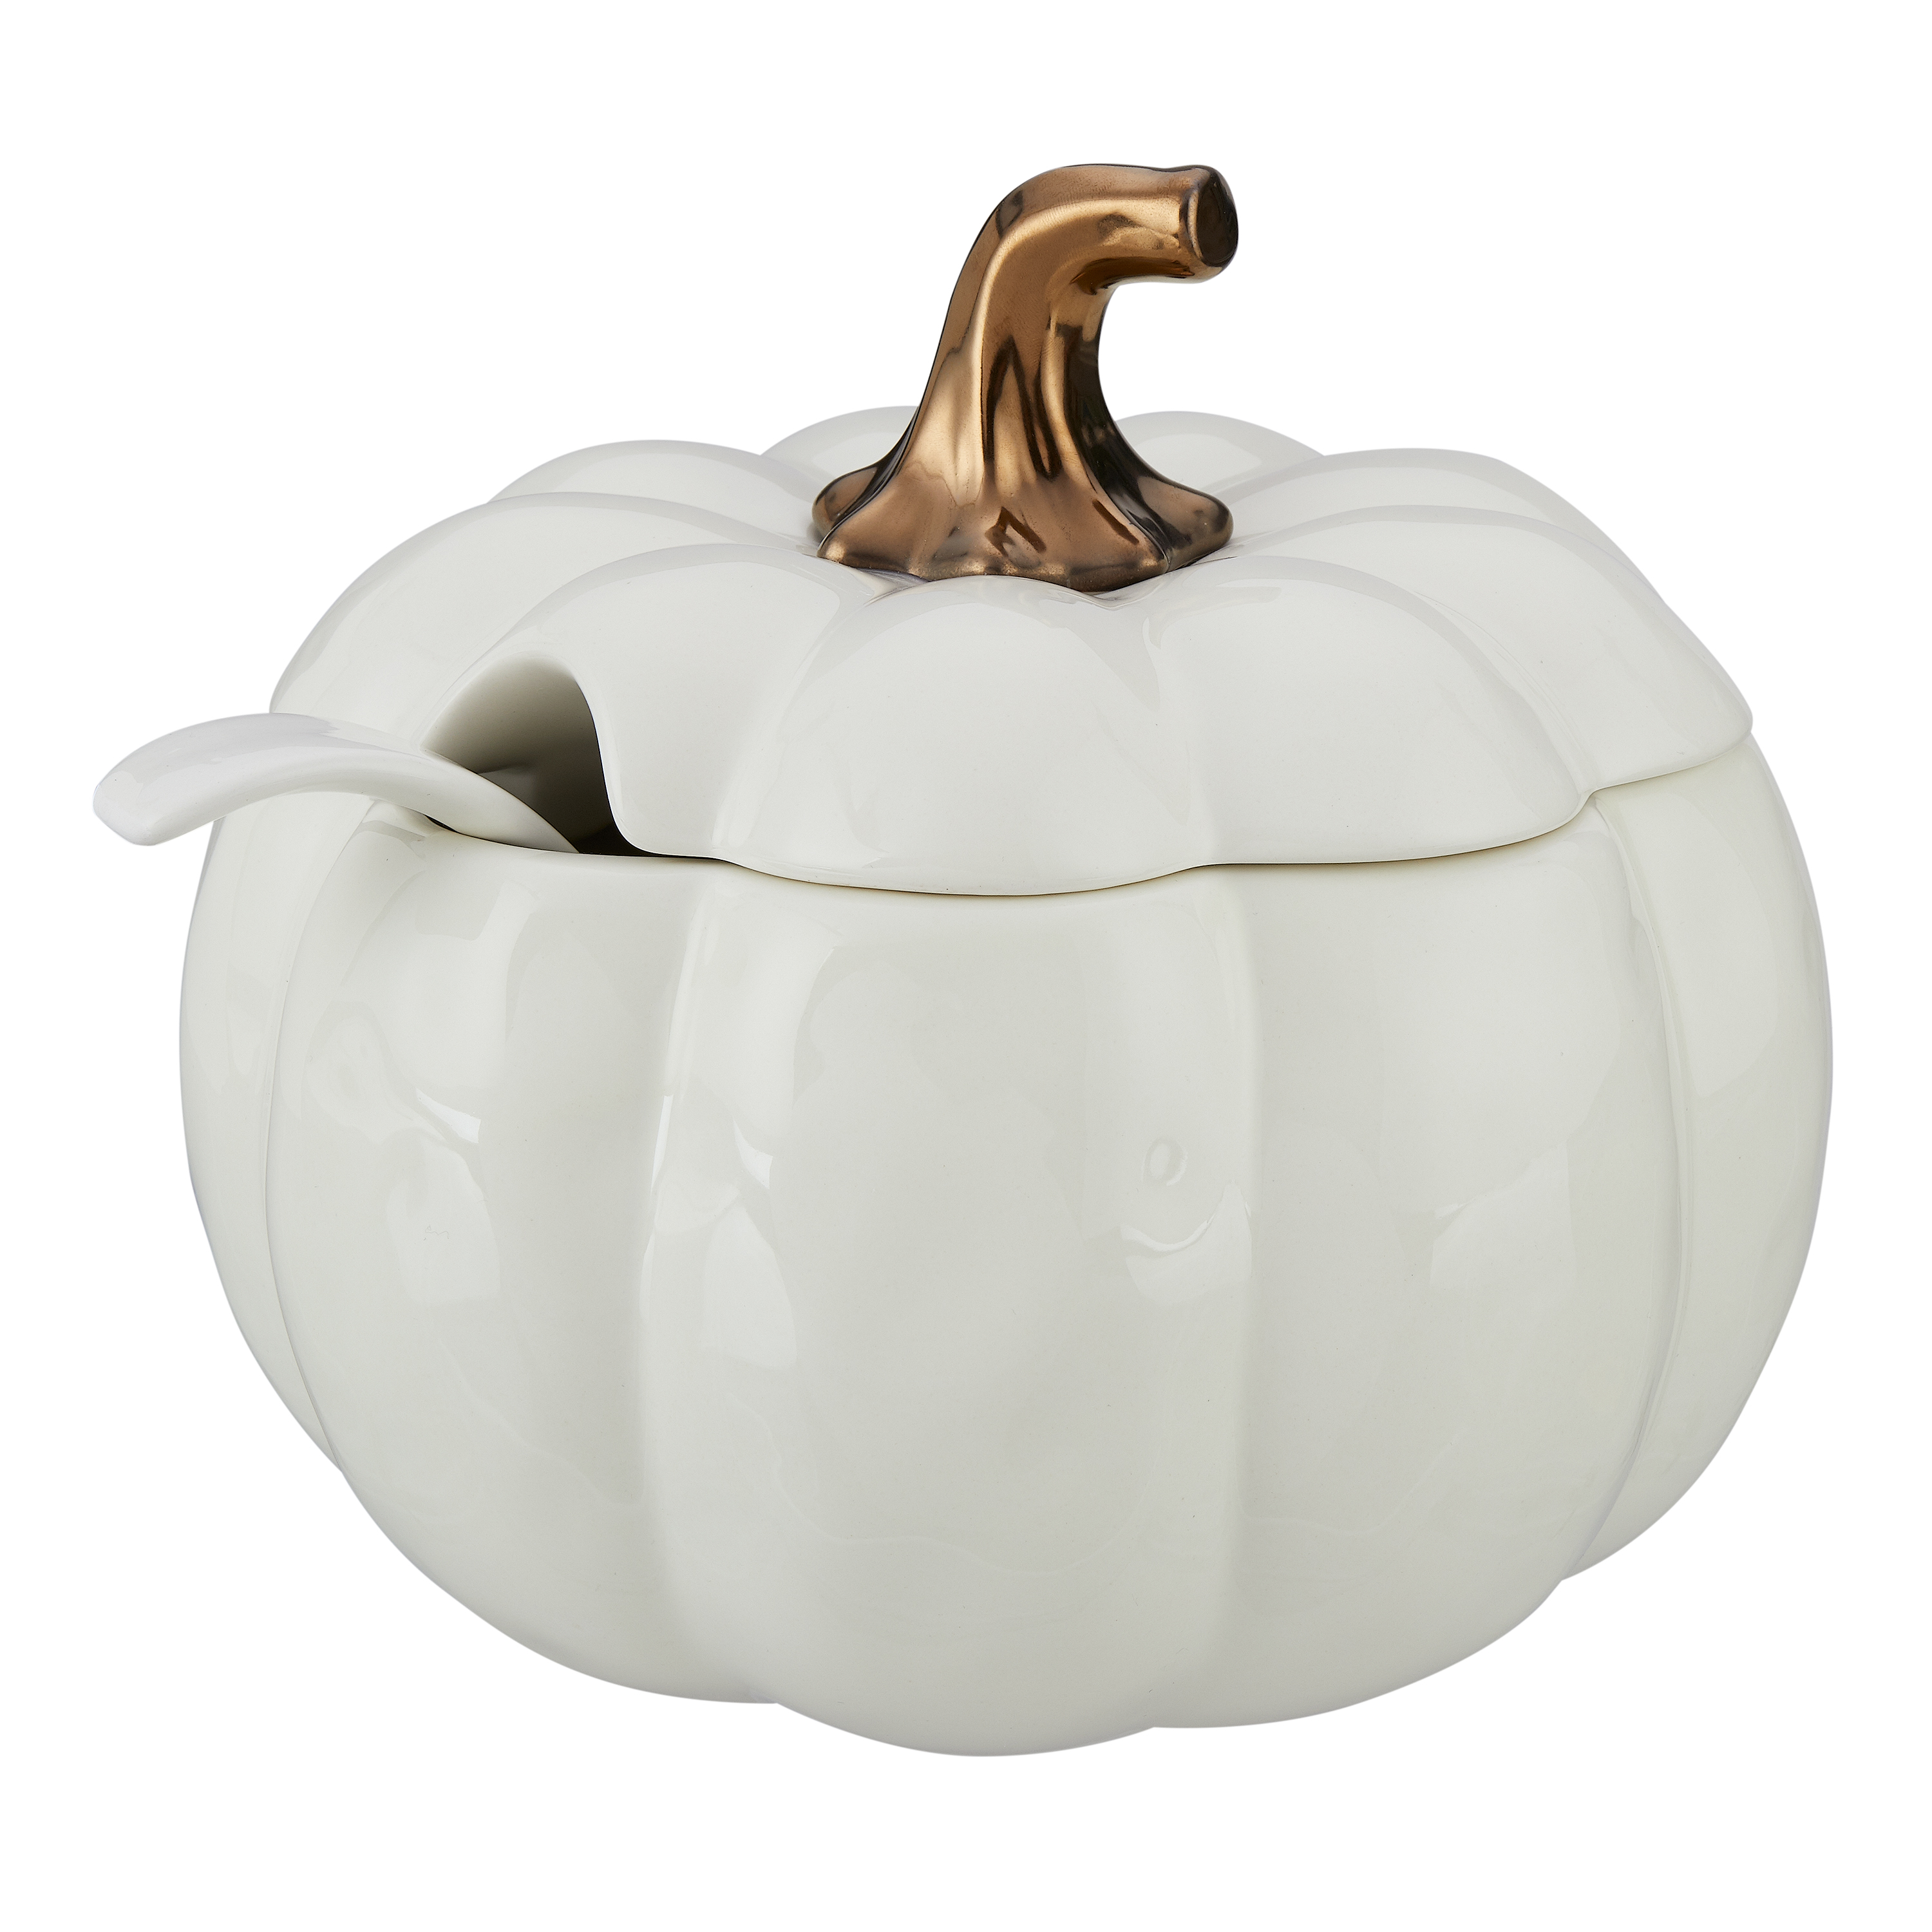 Better Homes & Gardens Pumpkin Soup Tureen Serving Bowl with Ladle - image 4 of 6